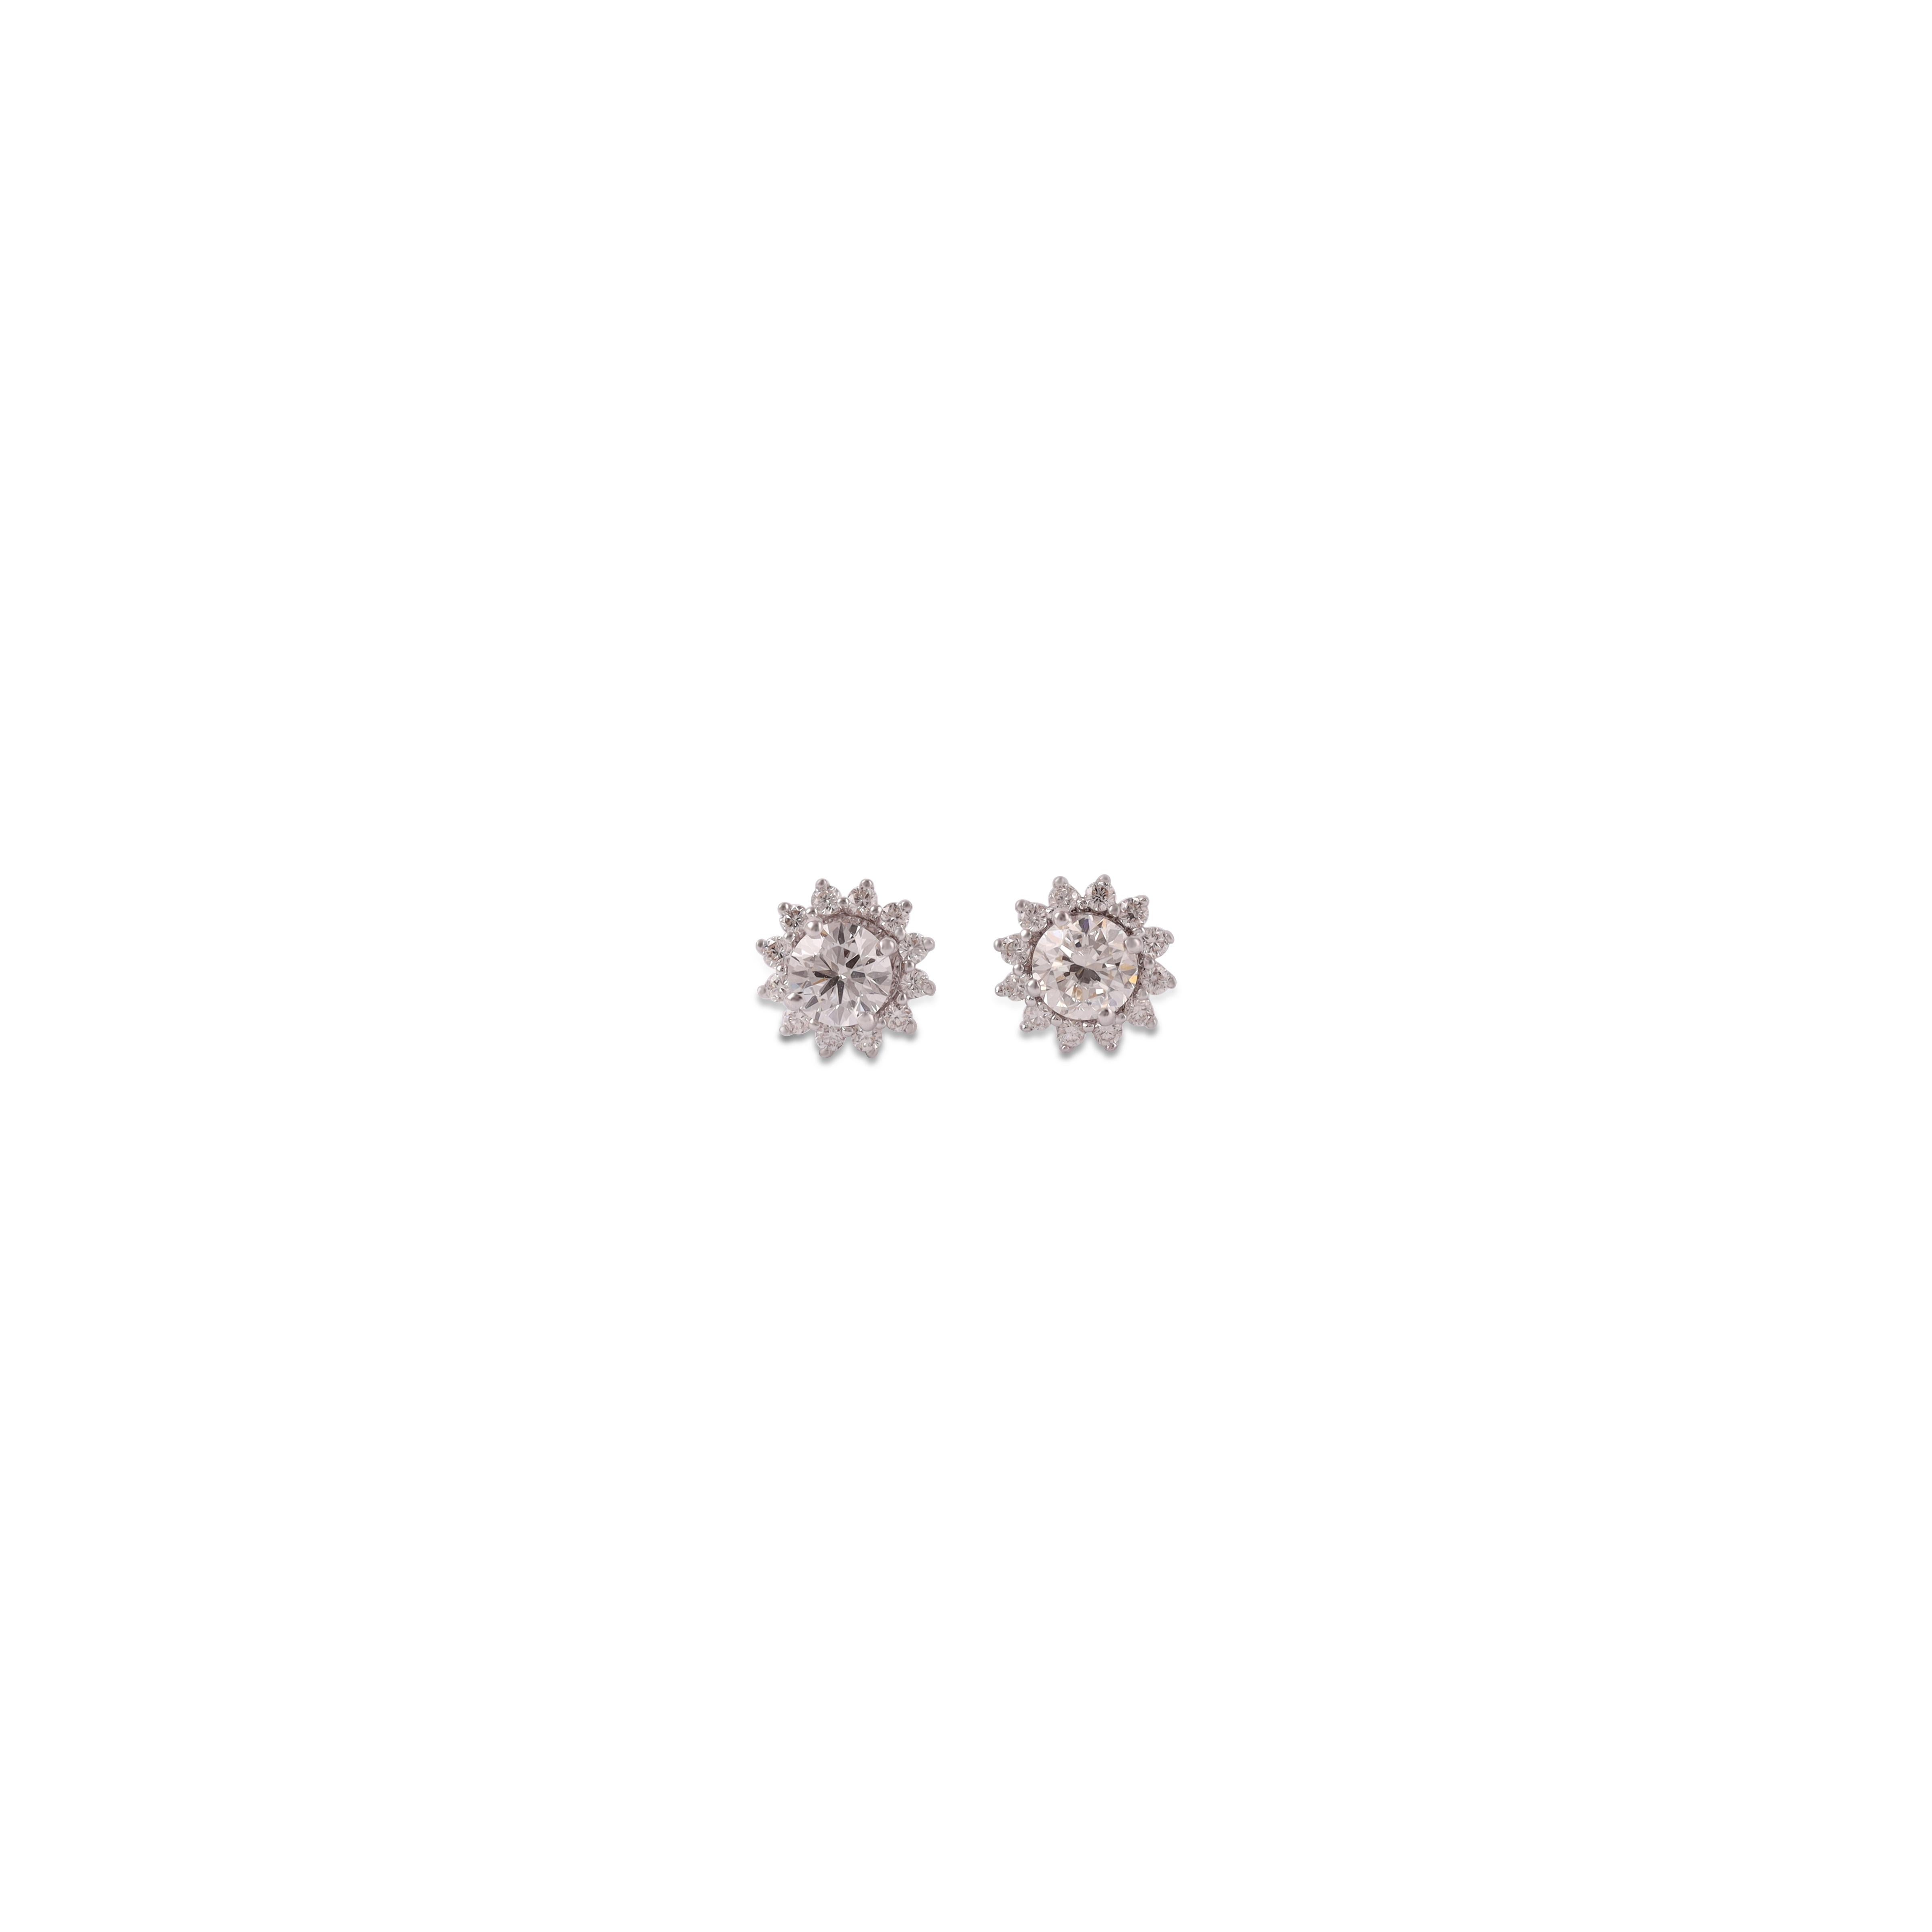 Diamond stud earrings weighing 0.50 Carats, in 18 Karat white Gold close  Setting.
Eye Clean, will not be able to tell on the Ear.
Great Pair for the Price too!
Gold - 1.86

More Diamond Studs Available